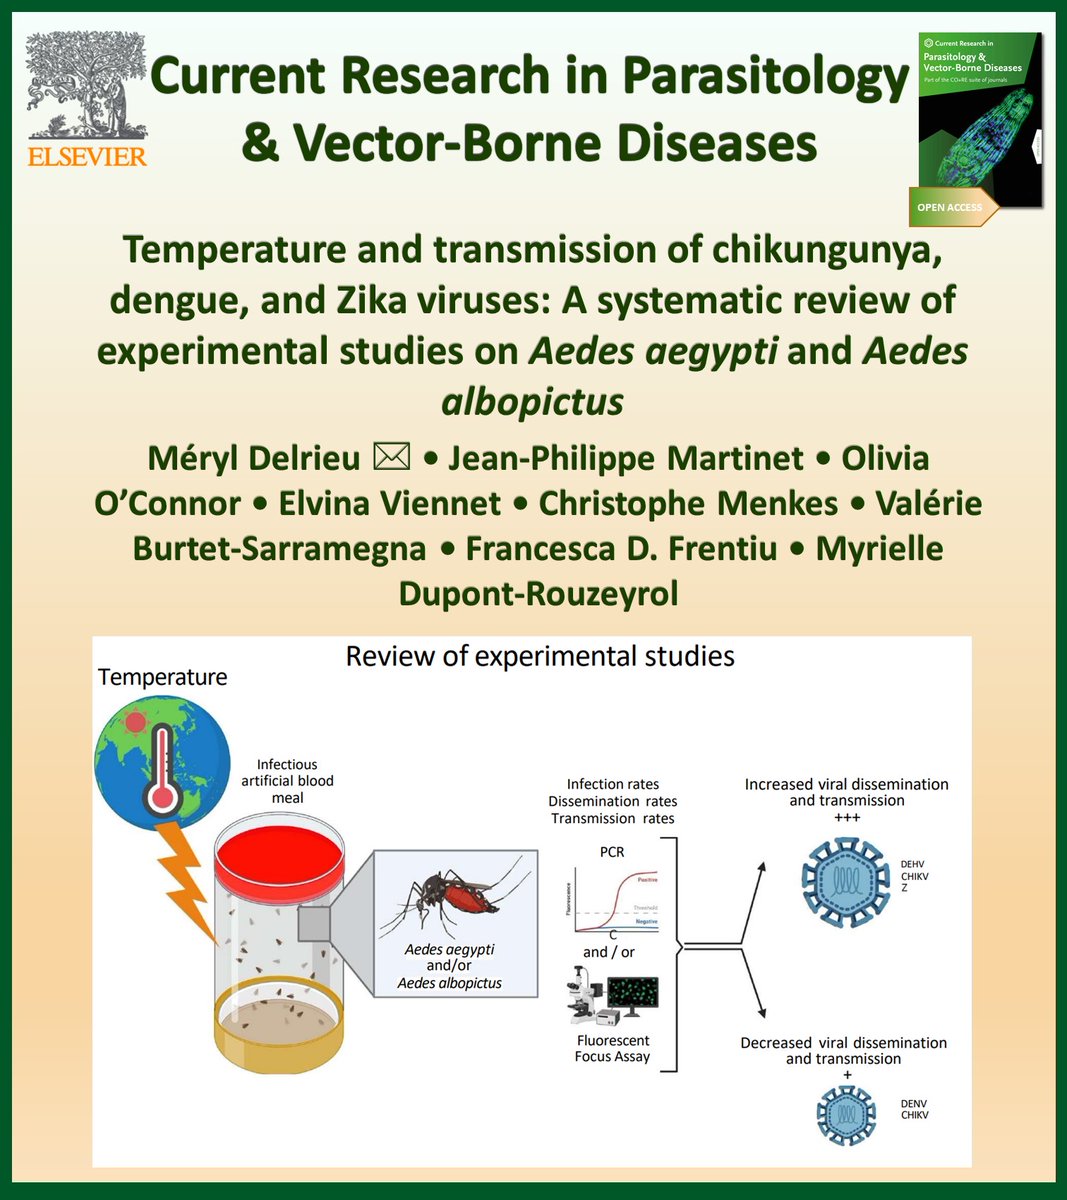 New in @CRPVBD

A review: Experimental studies of the effect of temperature on the transmission of DENV, CHIKV and ZIKV by Aedes aegypti and Ae. albopictus.

sciencedirect.com/science/articl…

#chikungunya #dengue #Zika

@M_delrieu @e_viennet @QUT_CIIC